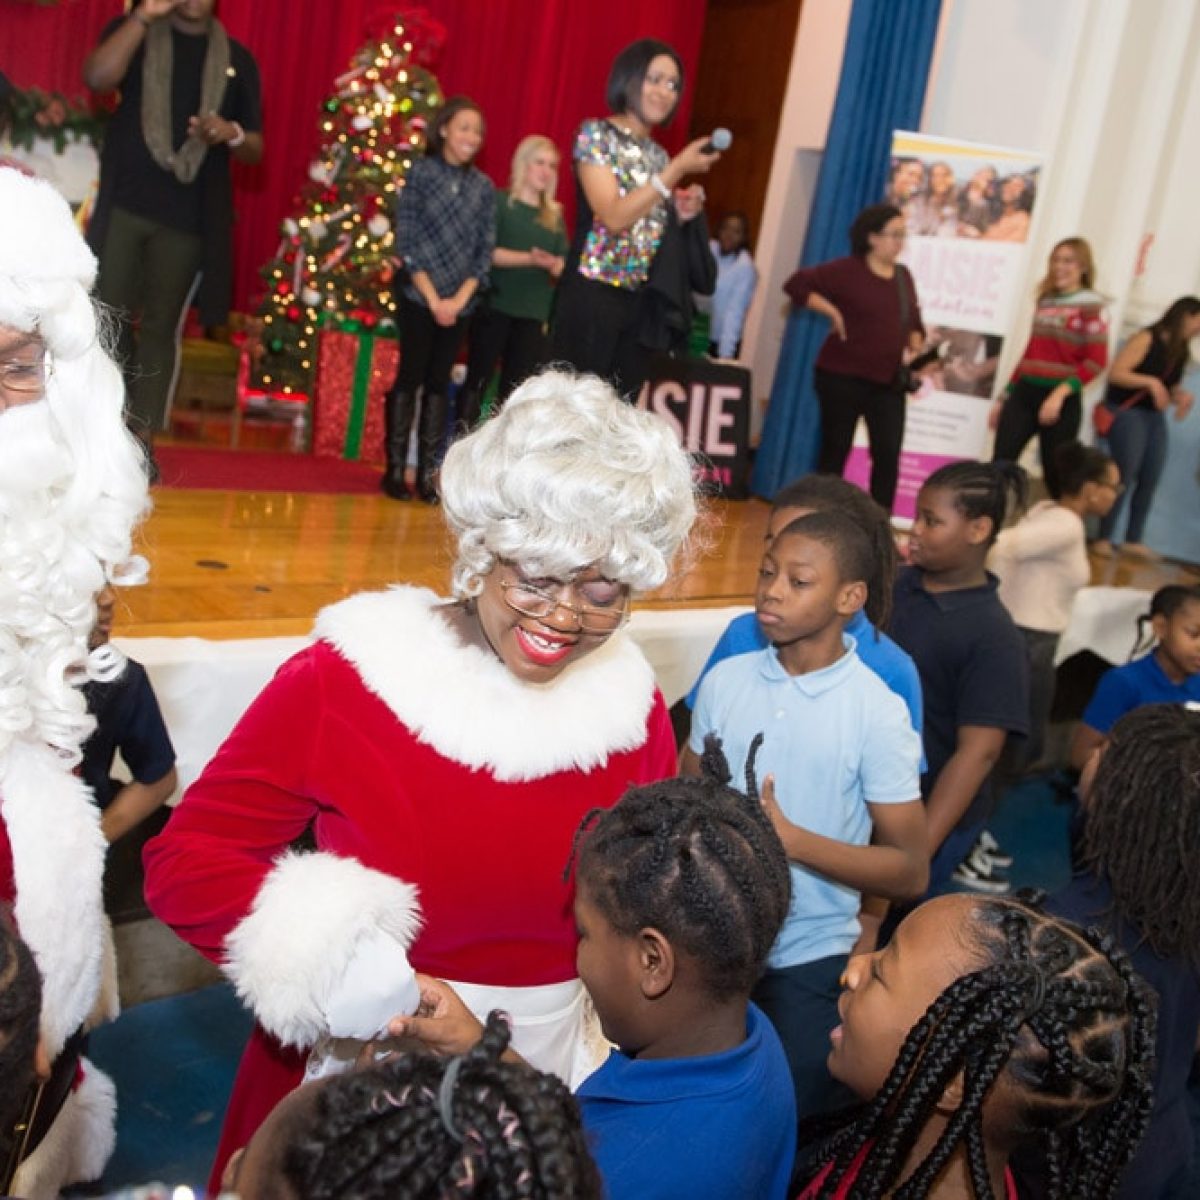 The Daisie Foundation calls it their 2018 holiday outreach, but the students involved call it the best surprise ever! This year, the Daisie Foundation is surprising students from Perkins Bass Elementary in Englewood. The Jam's Diana Gutierrez was there with more details.